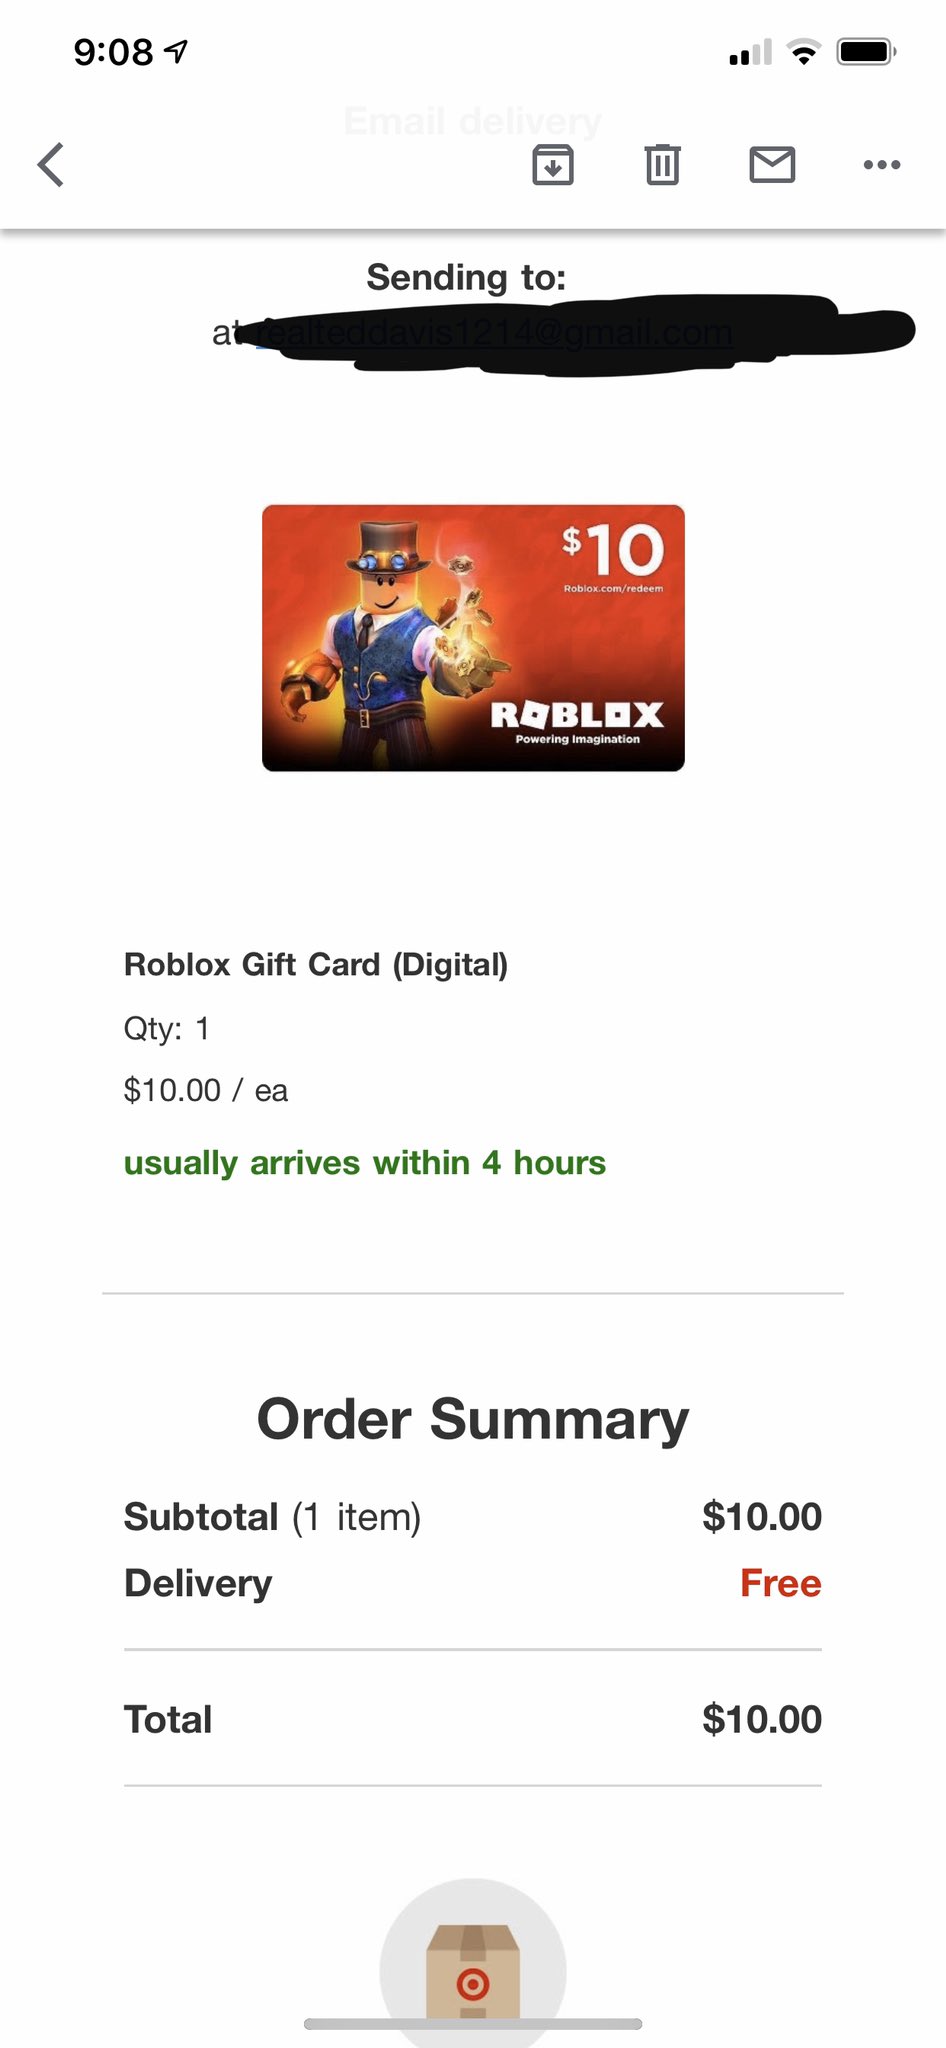 Ted On Twitter Doing A 10 Roblox Gift Card Giveaway I Ll Giveaway A Free 10 Roblox Gift Card To One Person How To Enter 1 Retweet This Post 2 Follow Me - roblox gift card 10